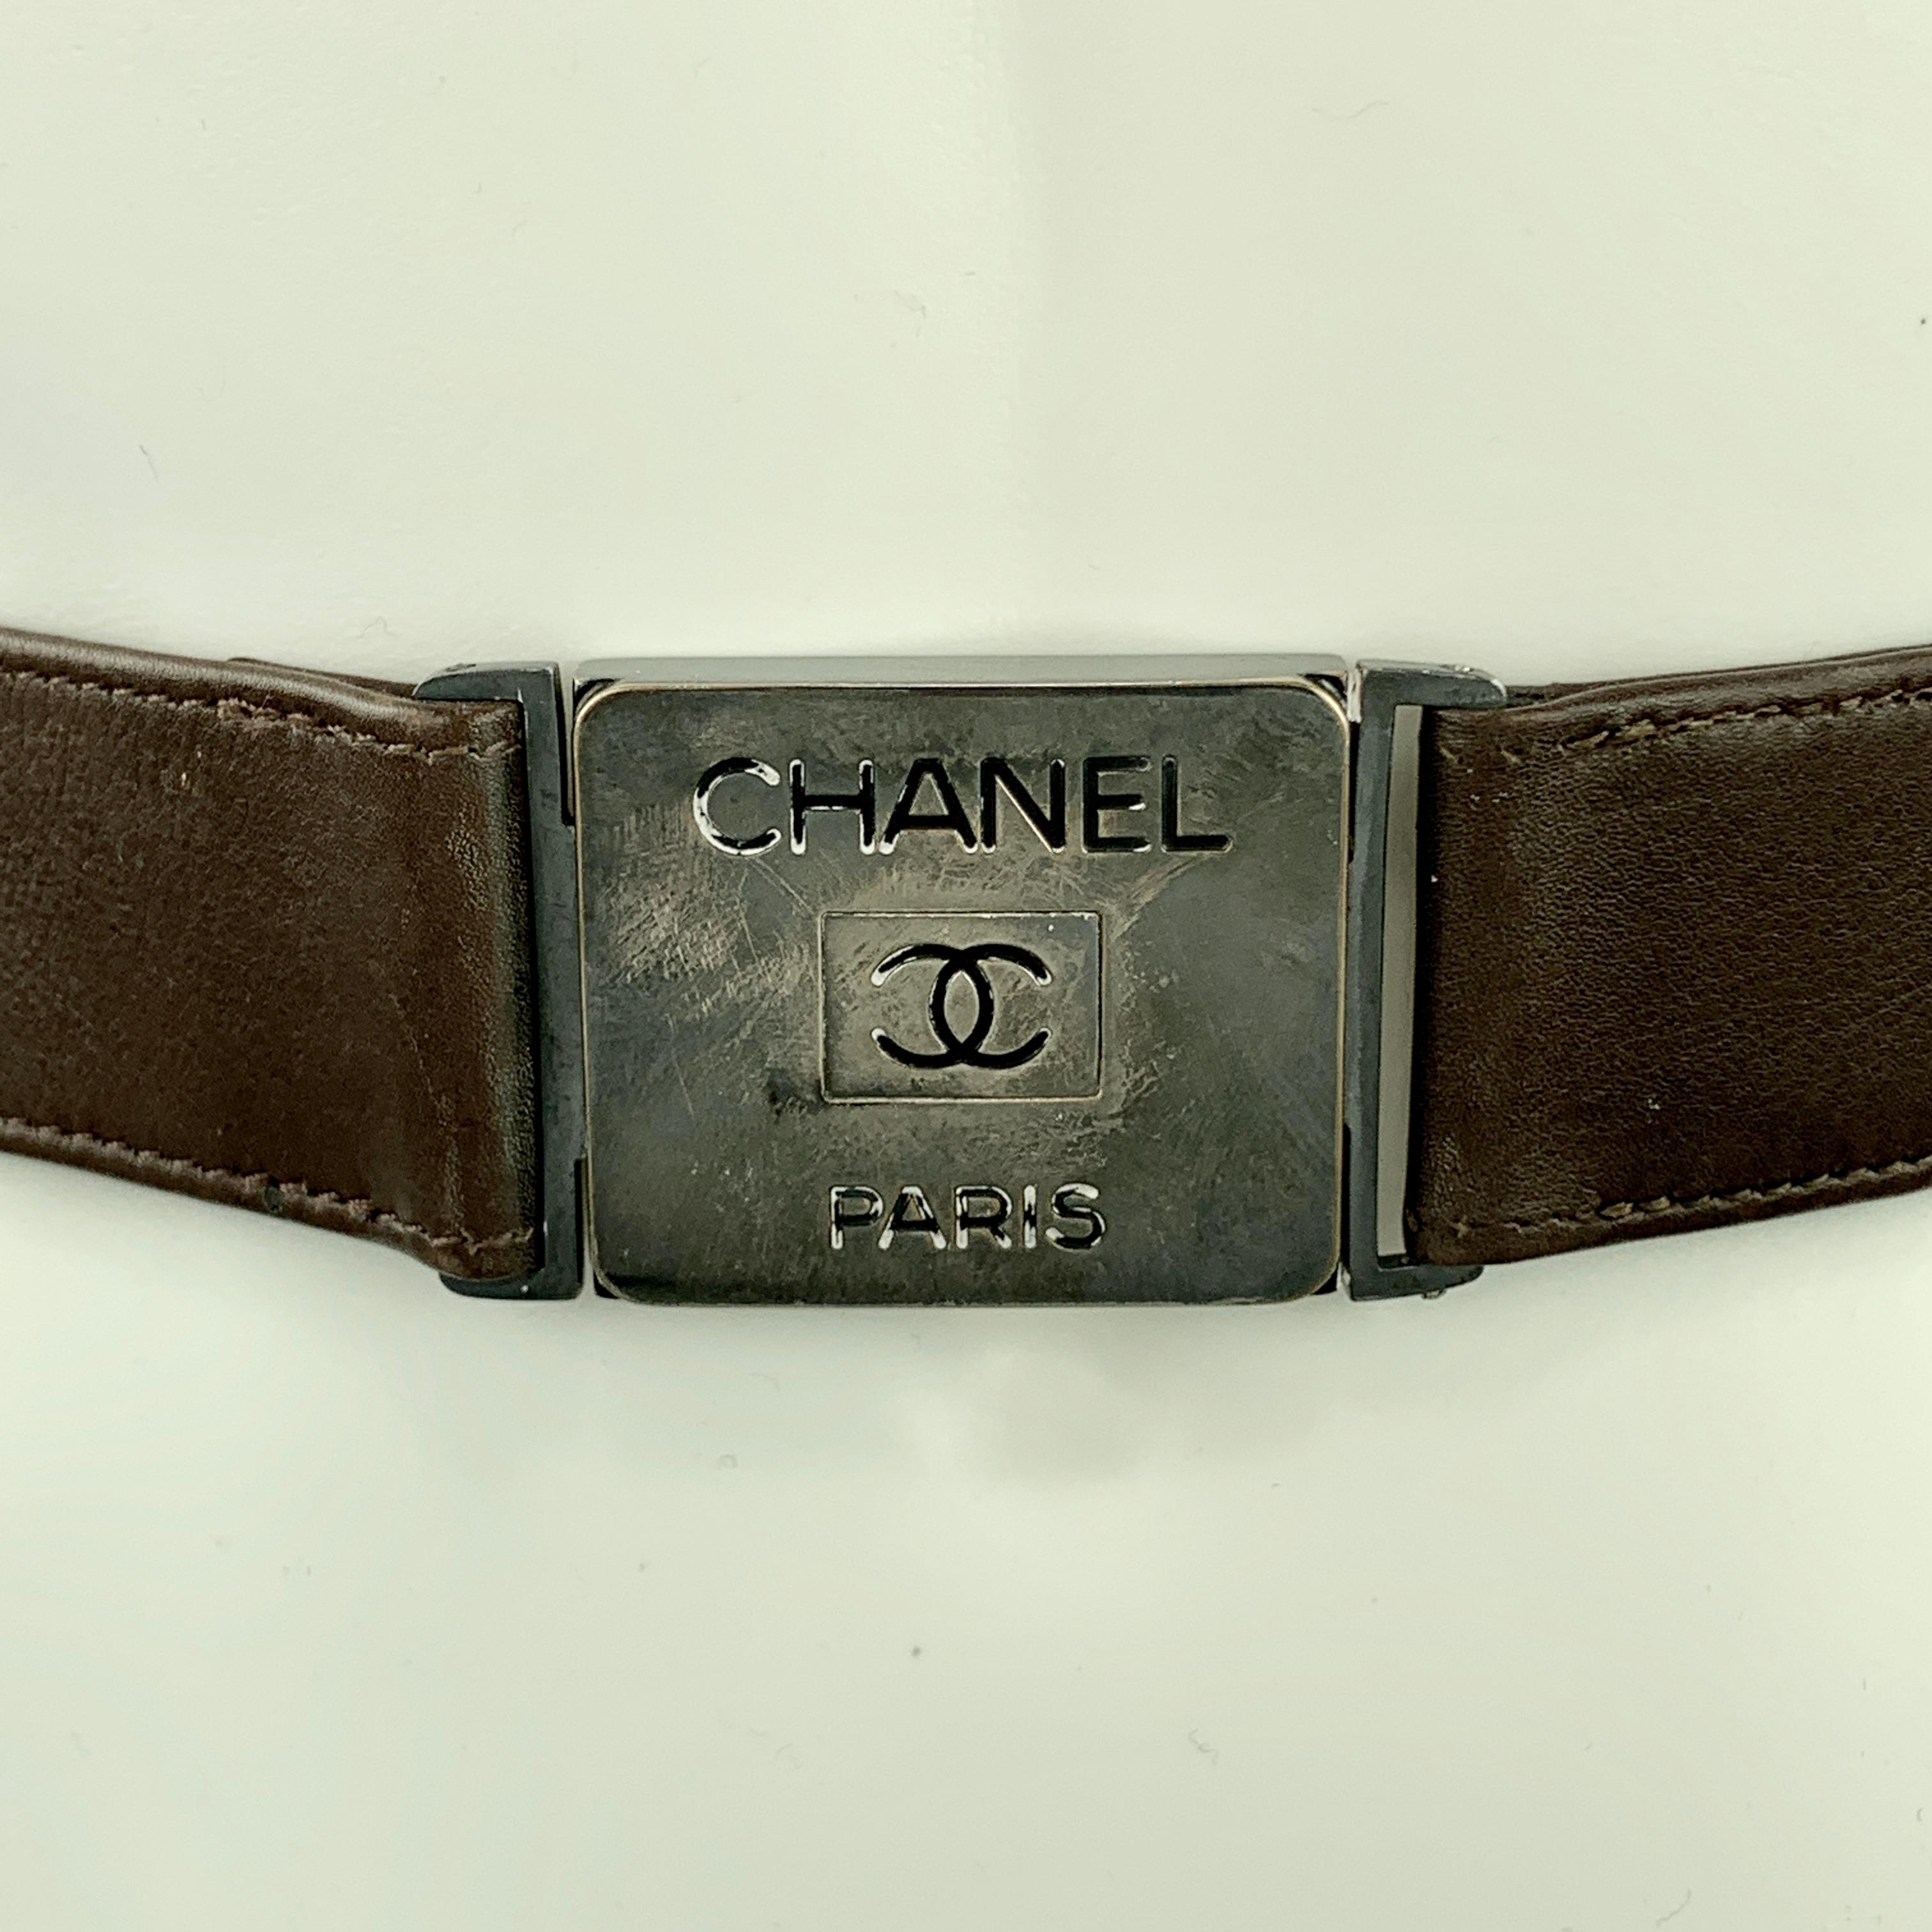 Vintage Spring 1996 Collection CHANEL belt features a brown leather strap with a smoke silver tone logo engraved metal push buckle. Wear on buckle. As-is. Made in France.

Fair Pre-Owned Condition.
Marked: 80/32  96 P

Length: 30 in.
Width: 4